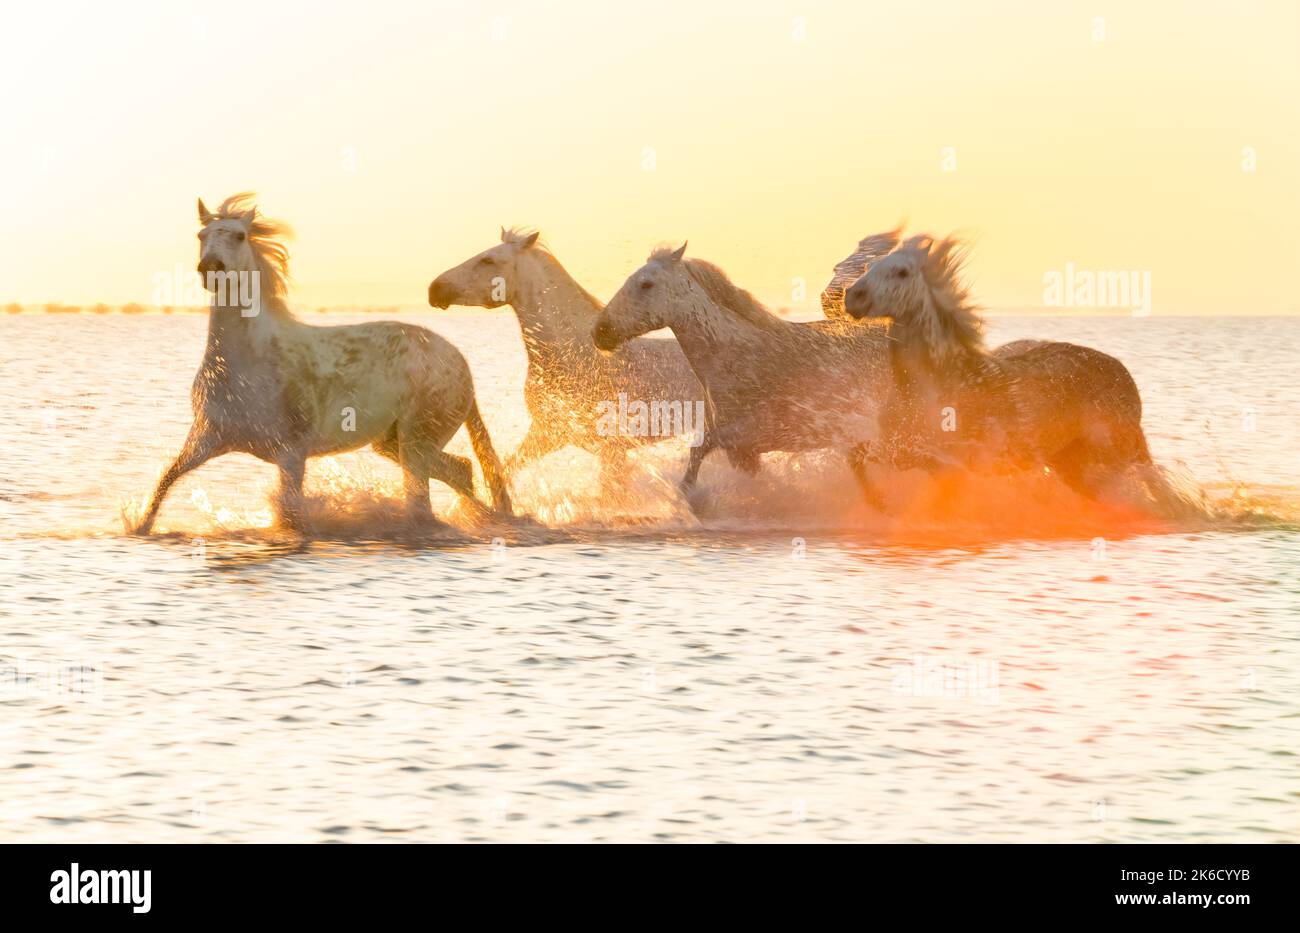 White horses running through water, The Camargue, France Stock Photo